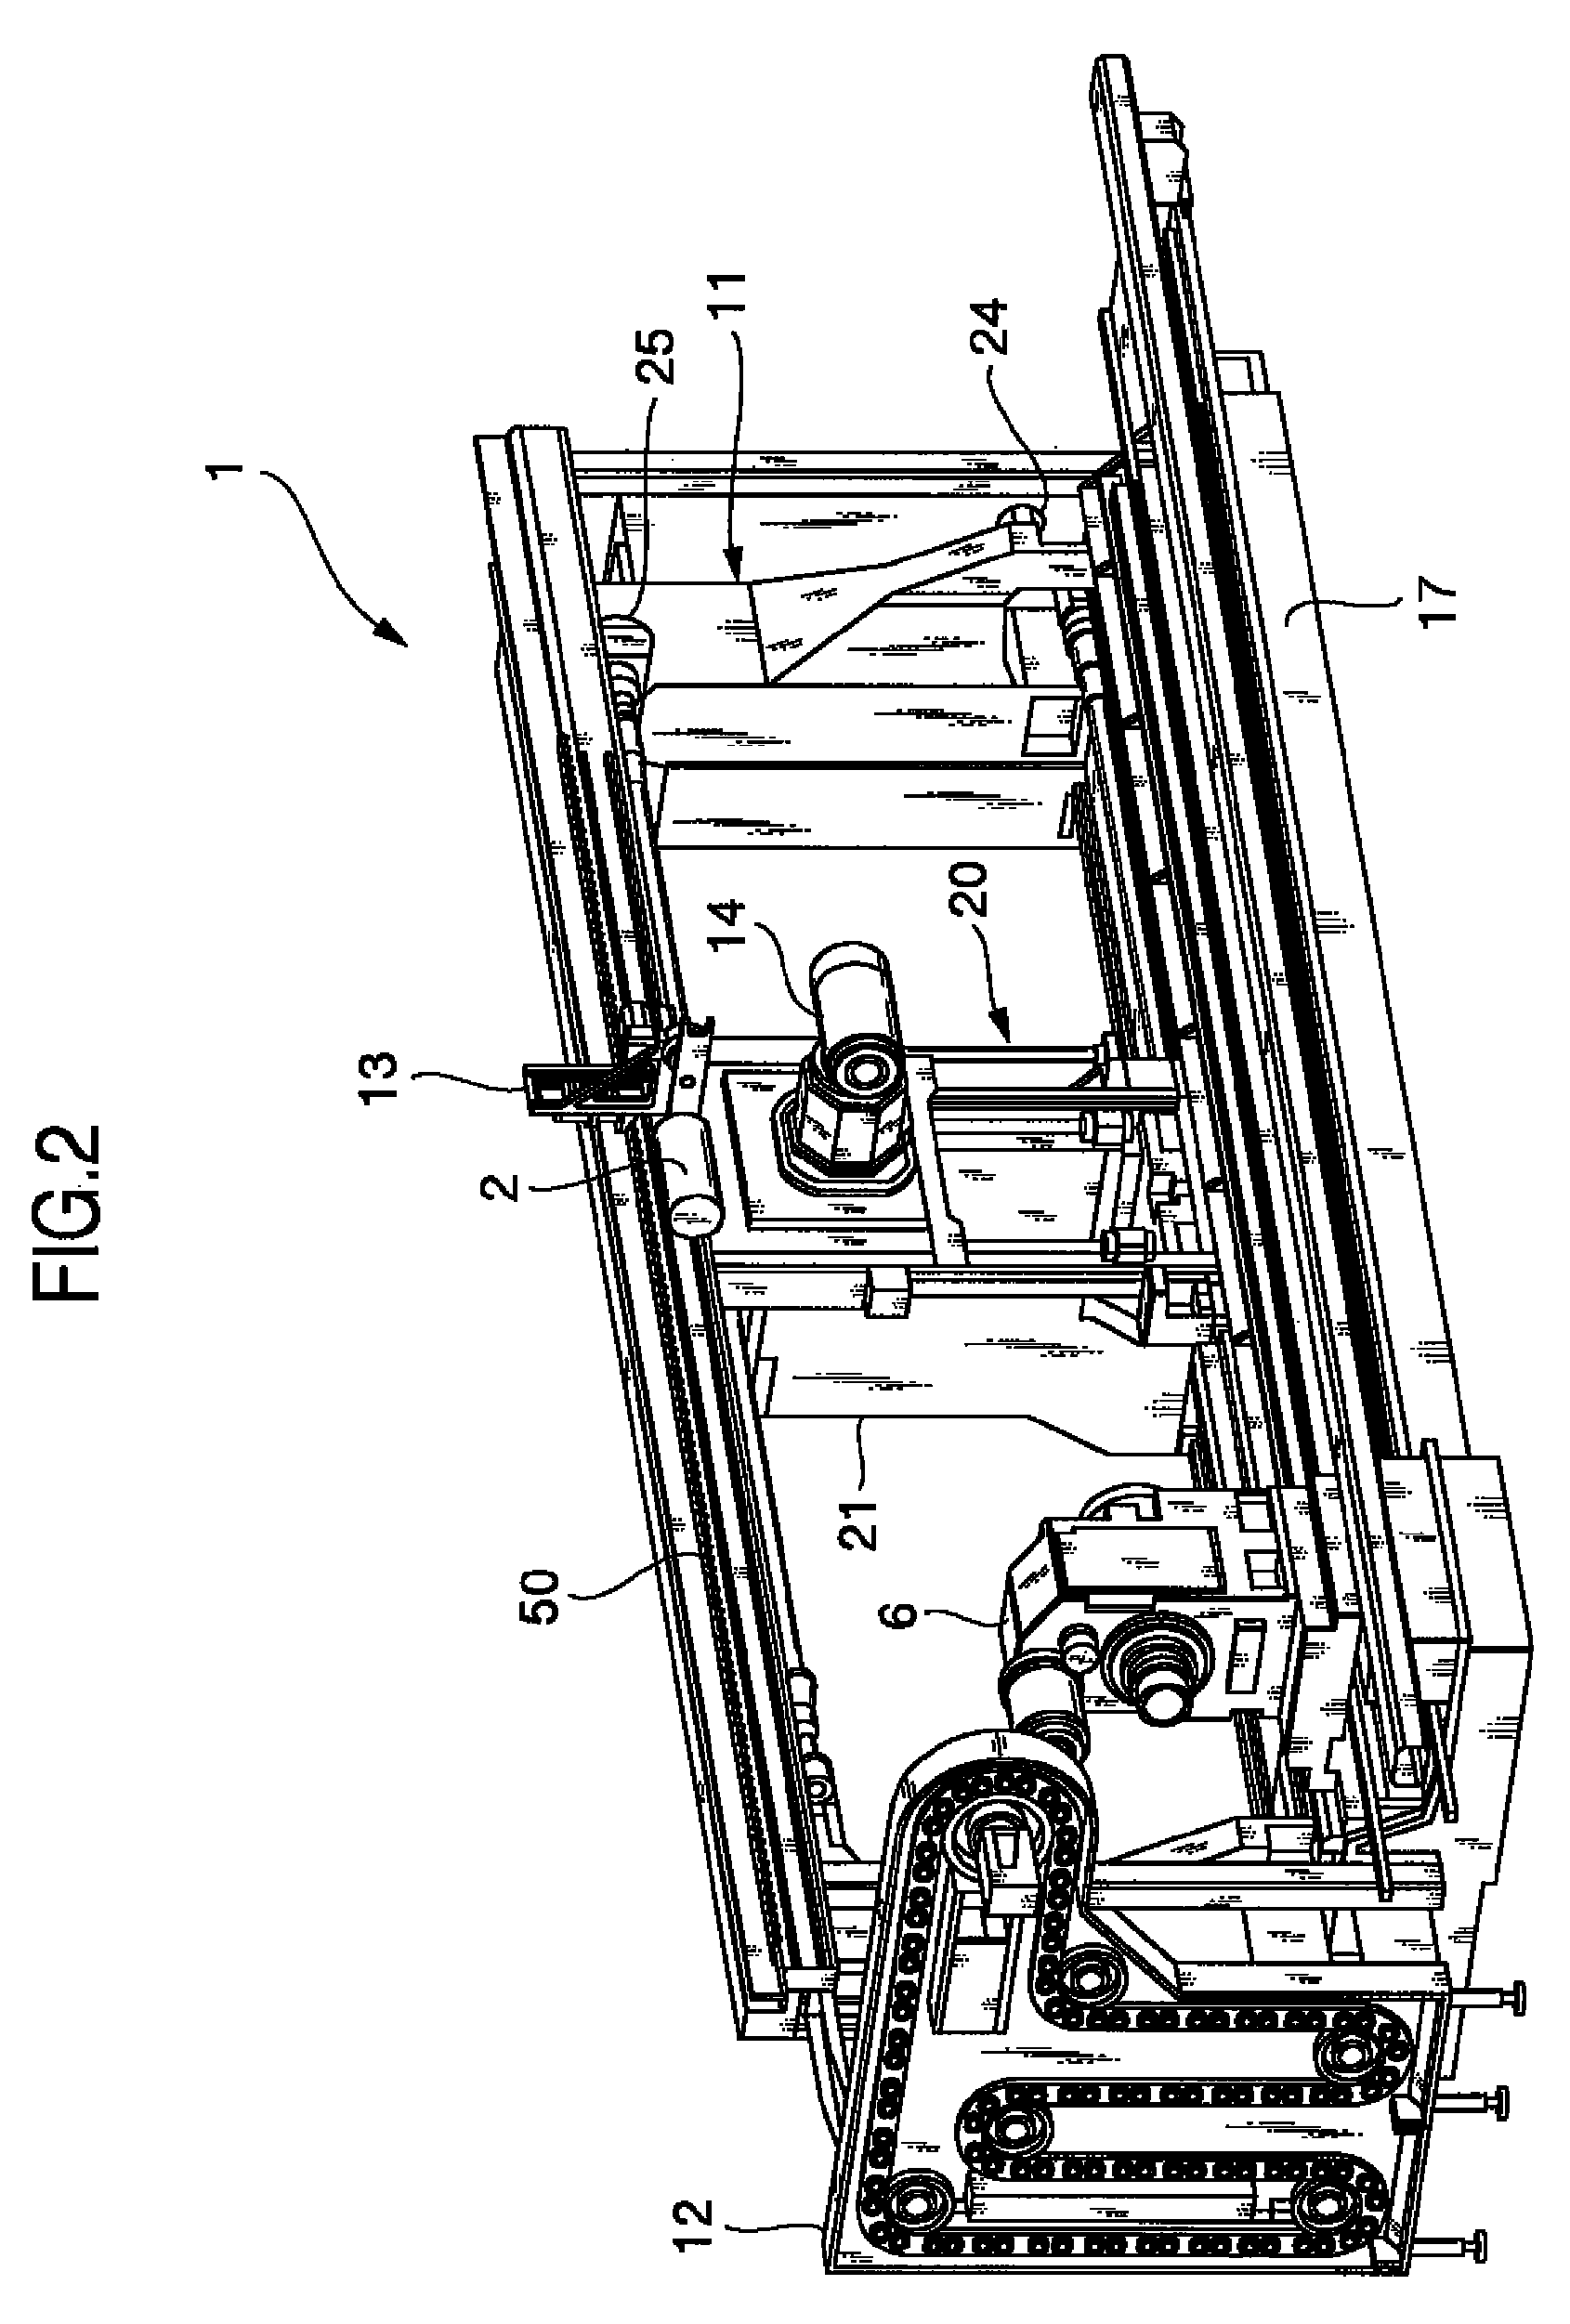 Machine tool with automatic tool changer